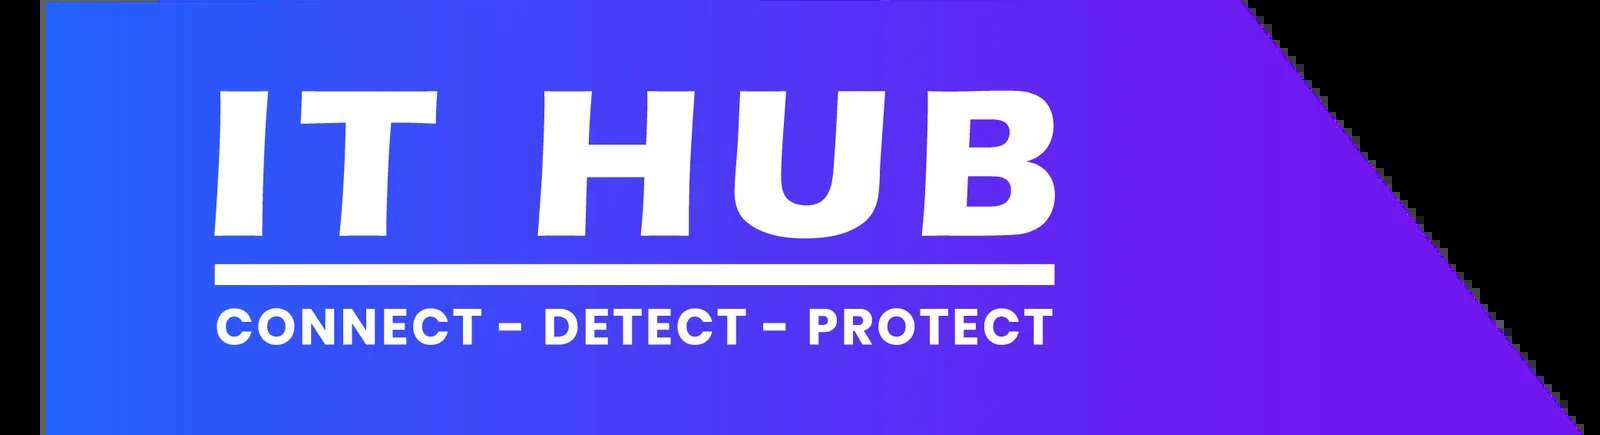 ITHUB TECHNOLOGIES Profile Picture